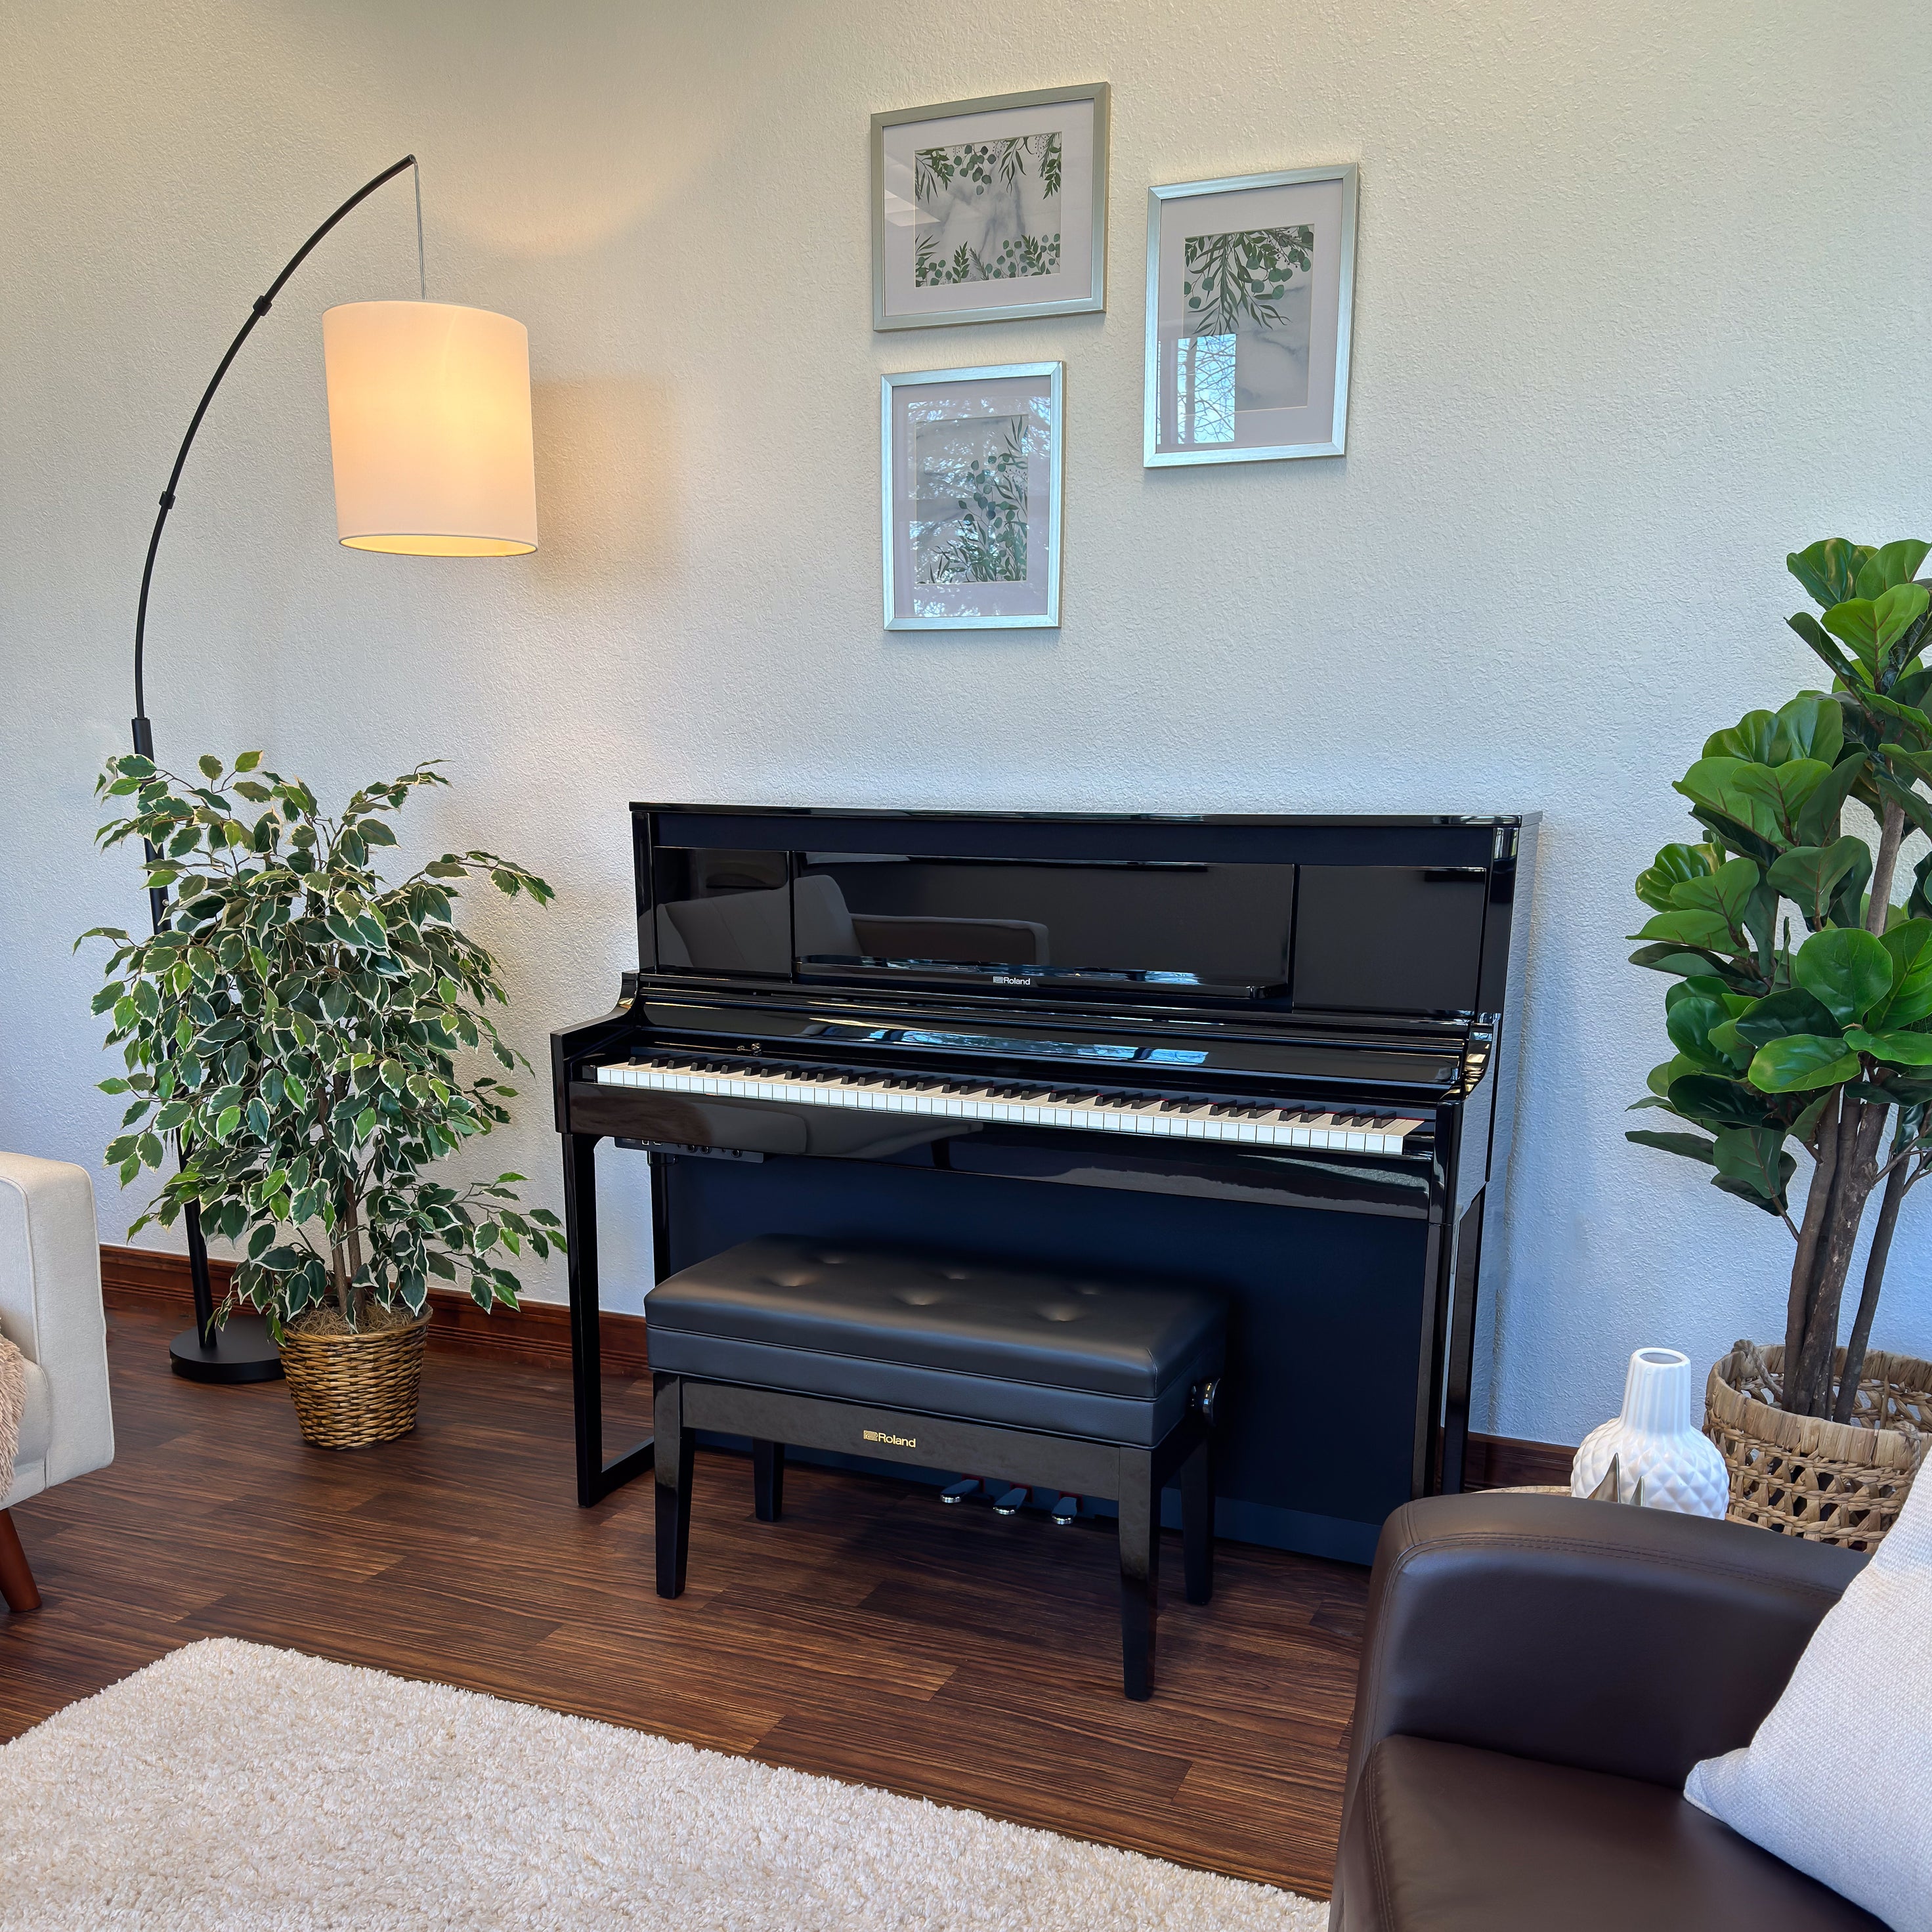 Roland LX-6 Digital Piano with Bench - Polished Ebony - in a stylish living space view 3